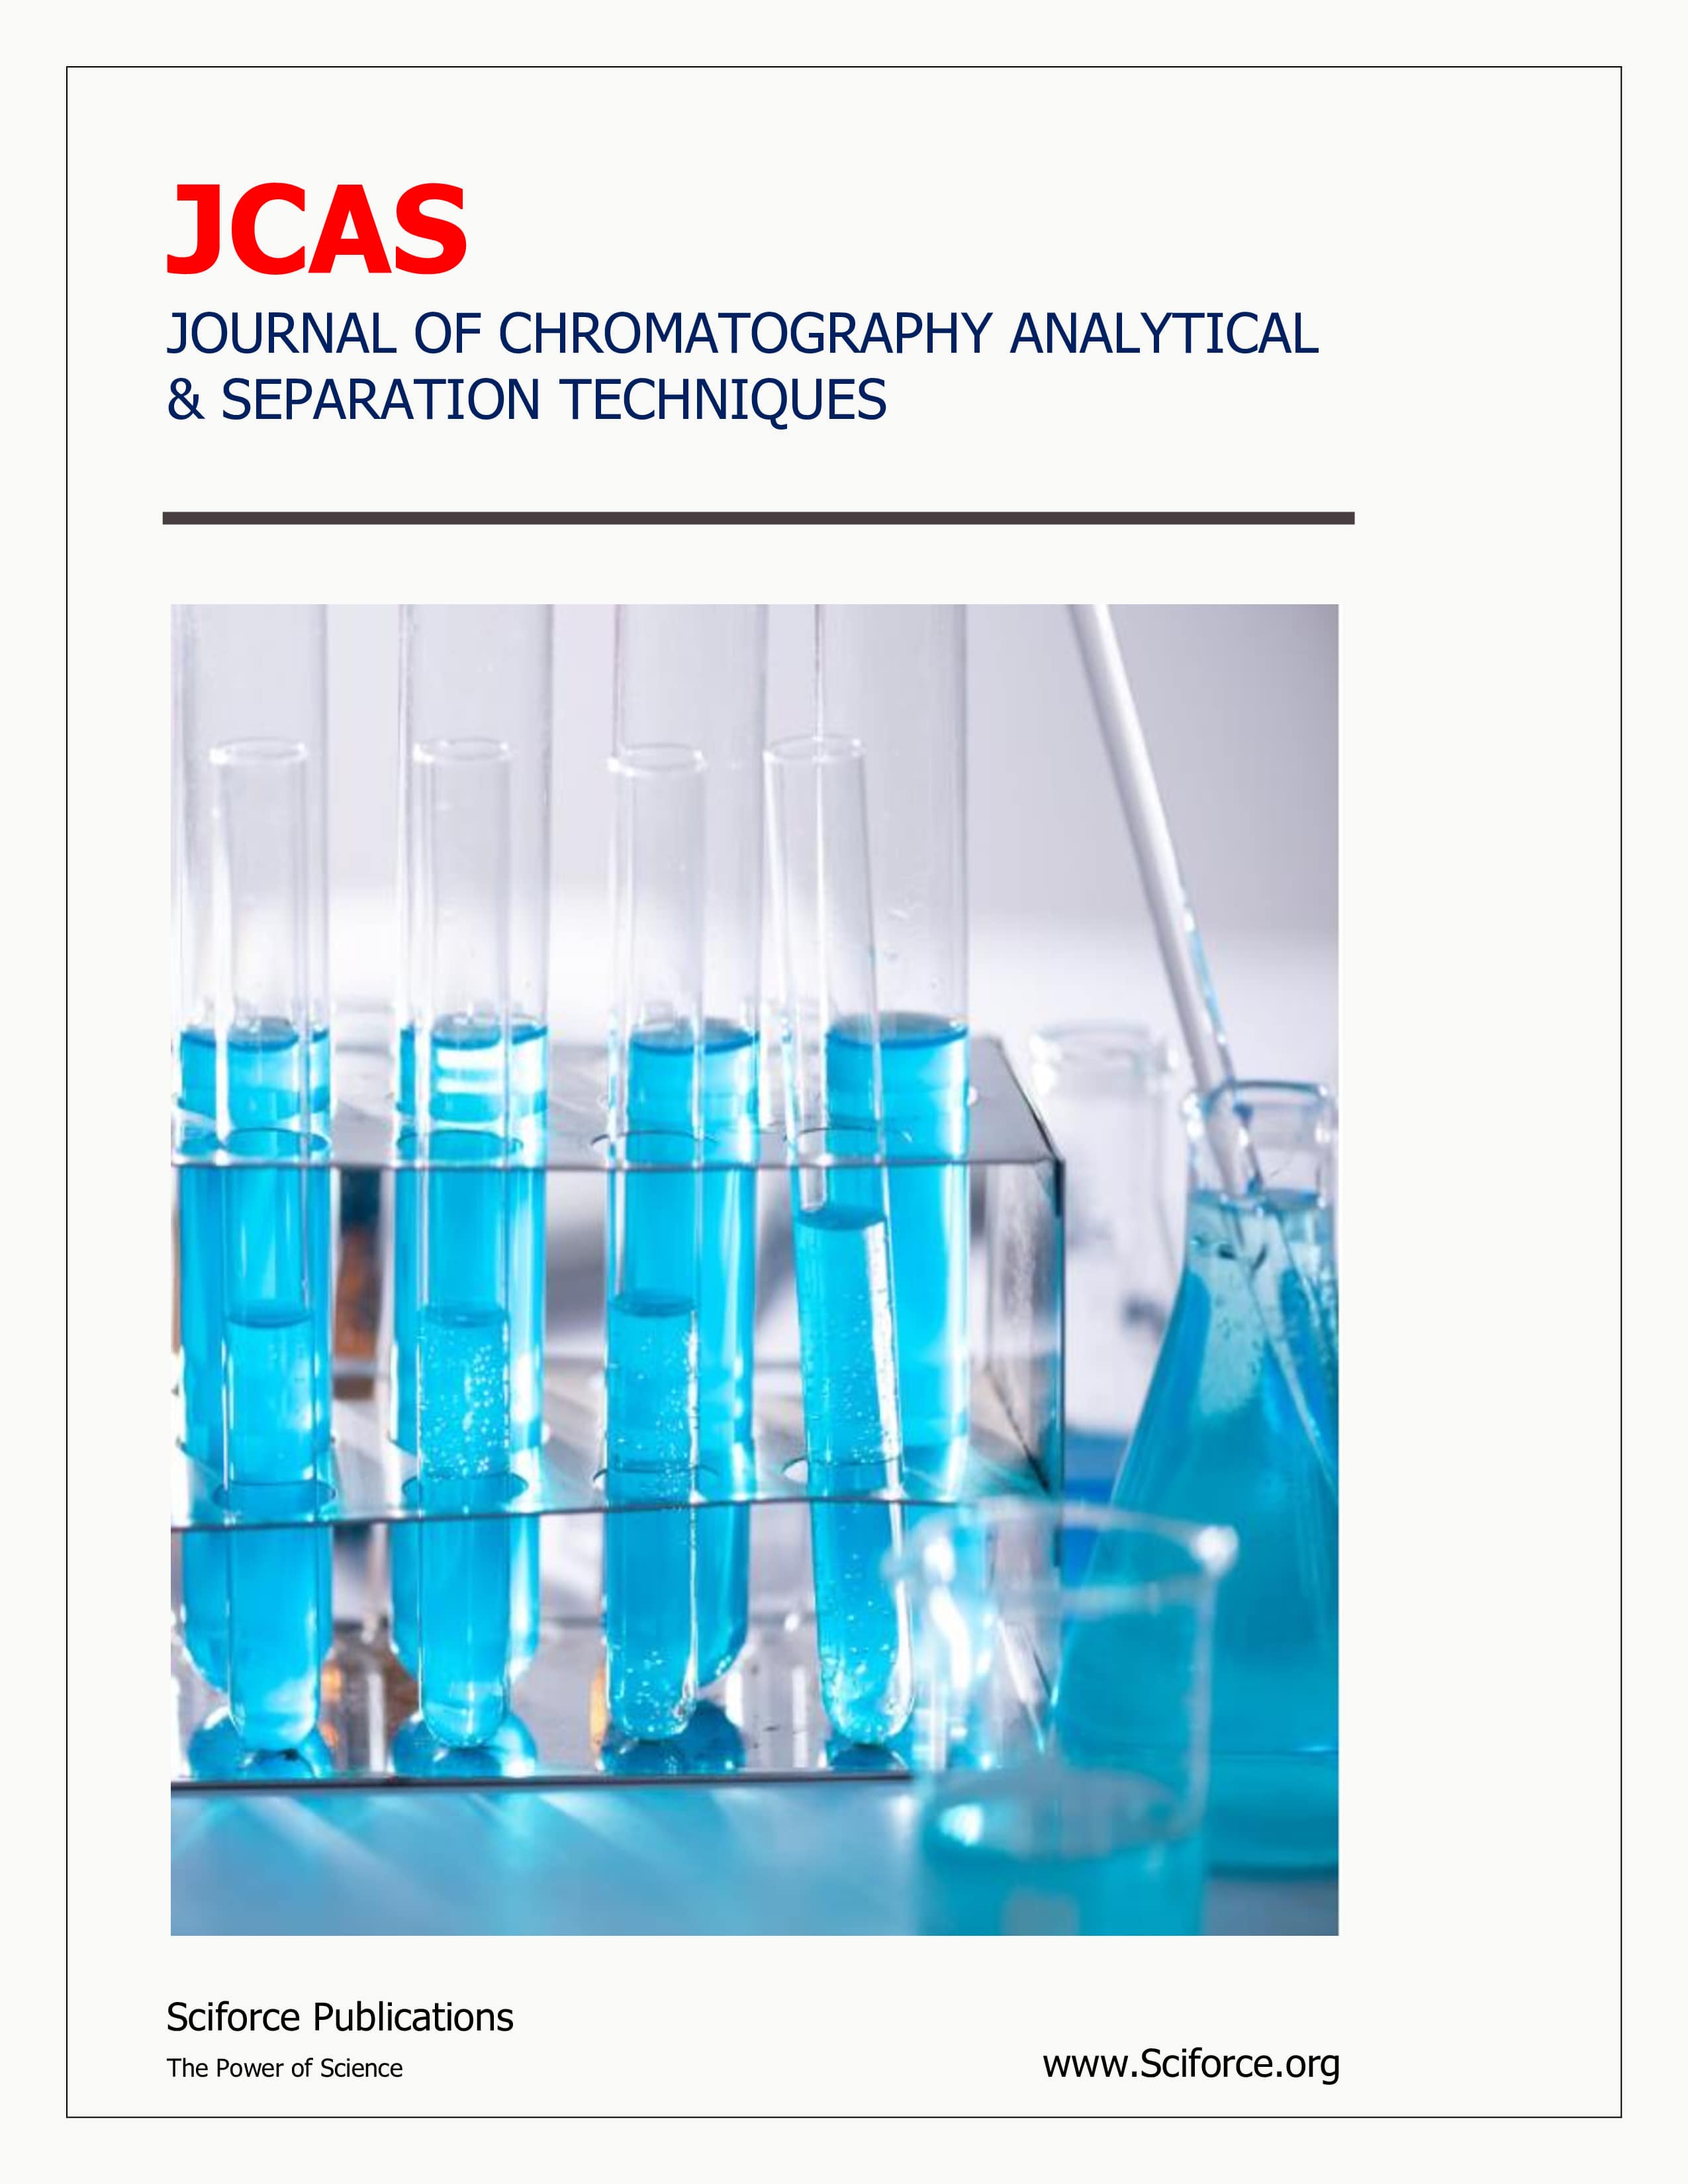 Journal of Chromatography Analytical Separation Techniques